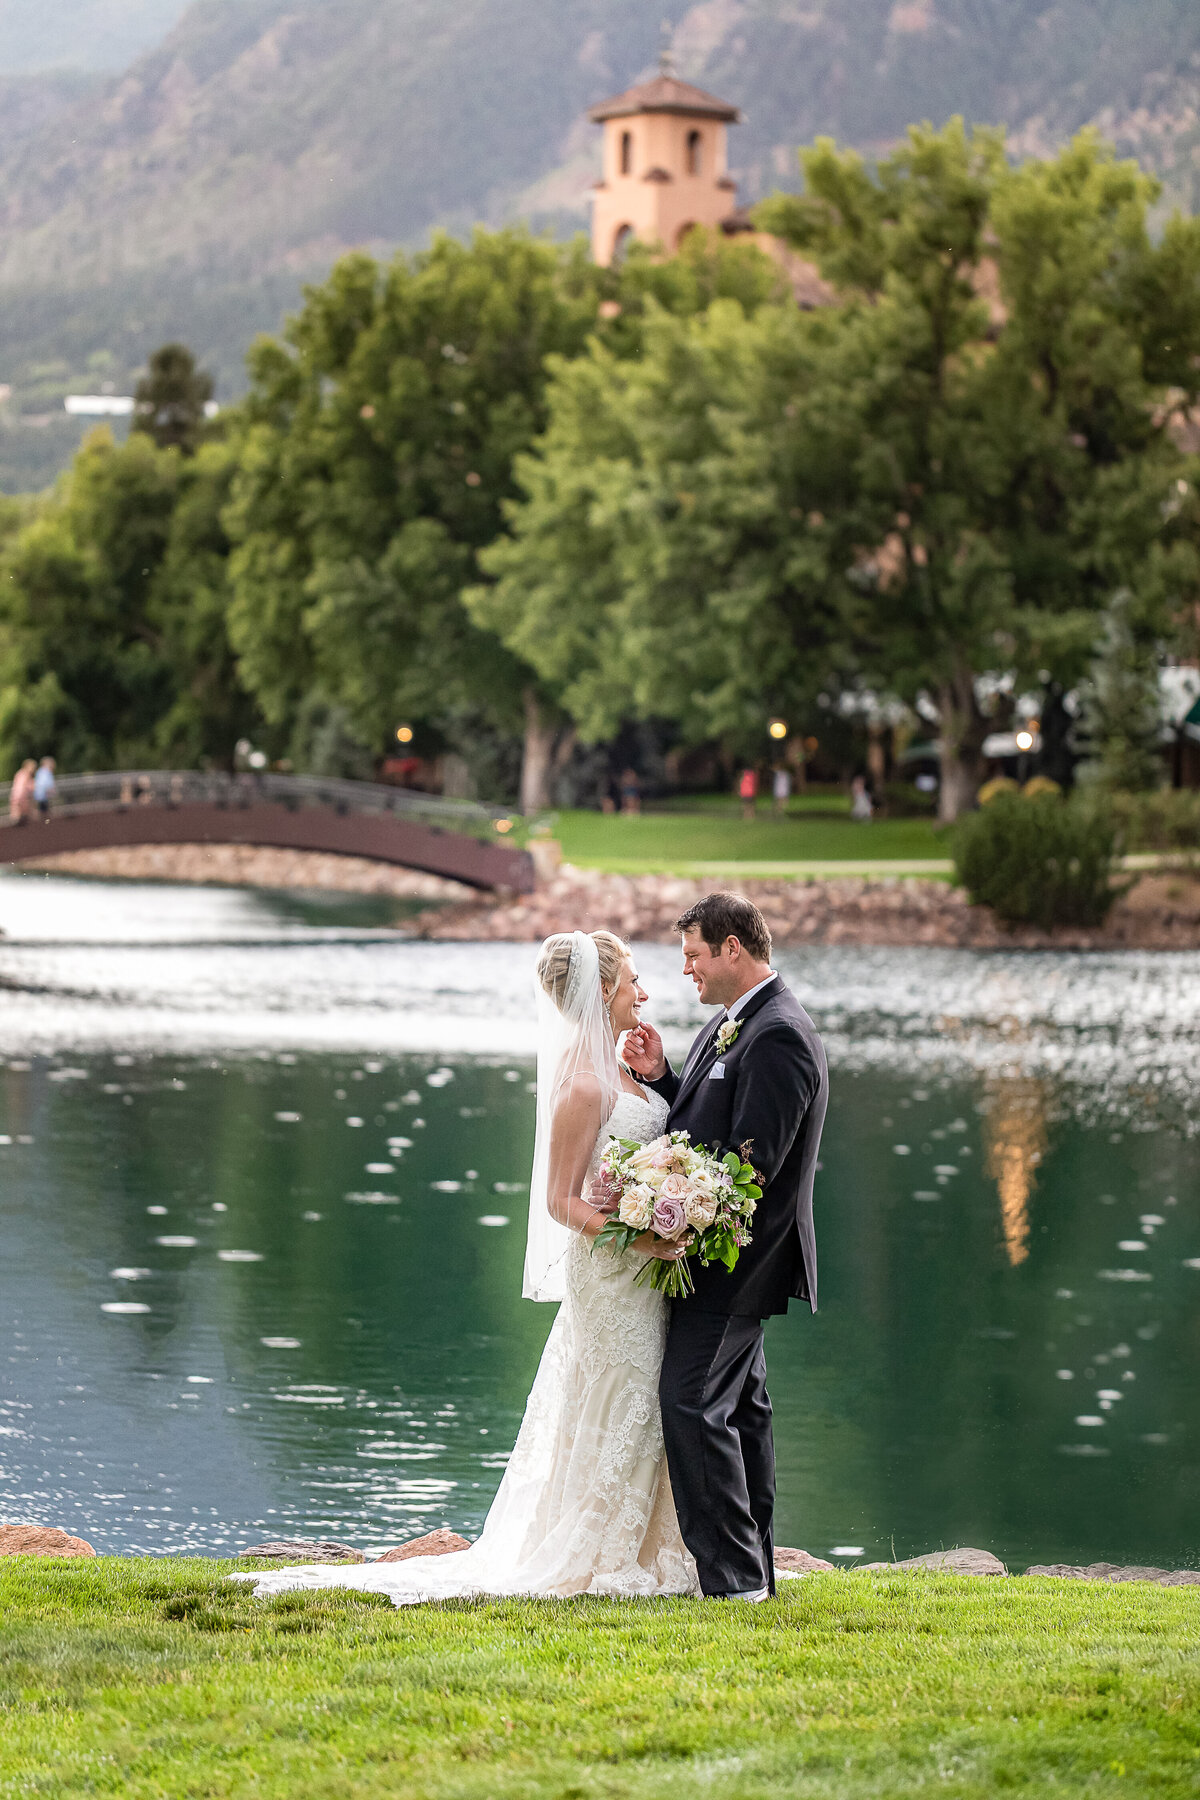 Just Married at the Broadmoor